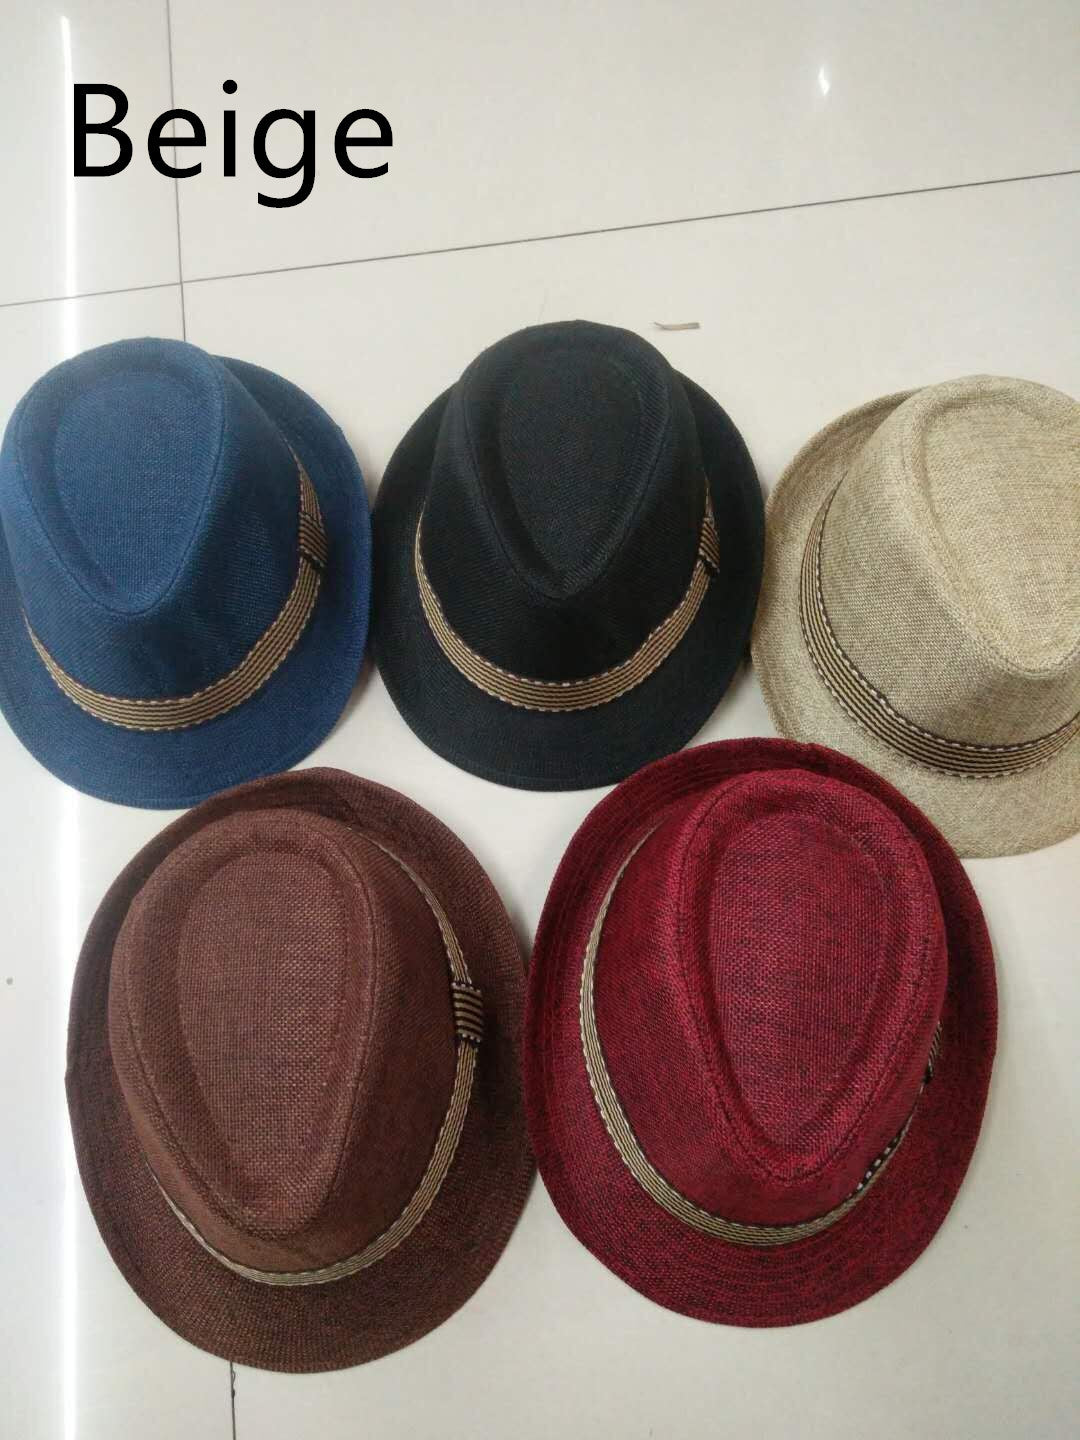 Sun Hat Casual Fashion Jazz Hat Top Hat In Spring And Summer